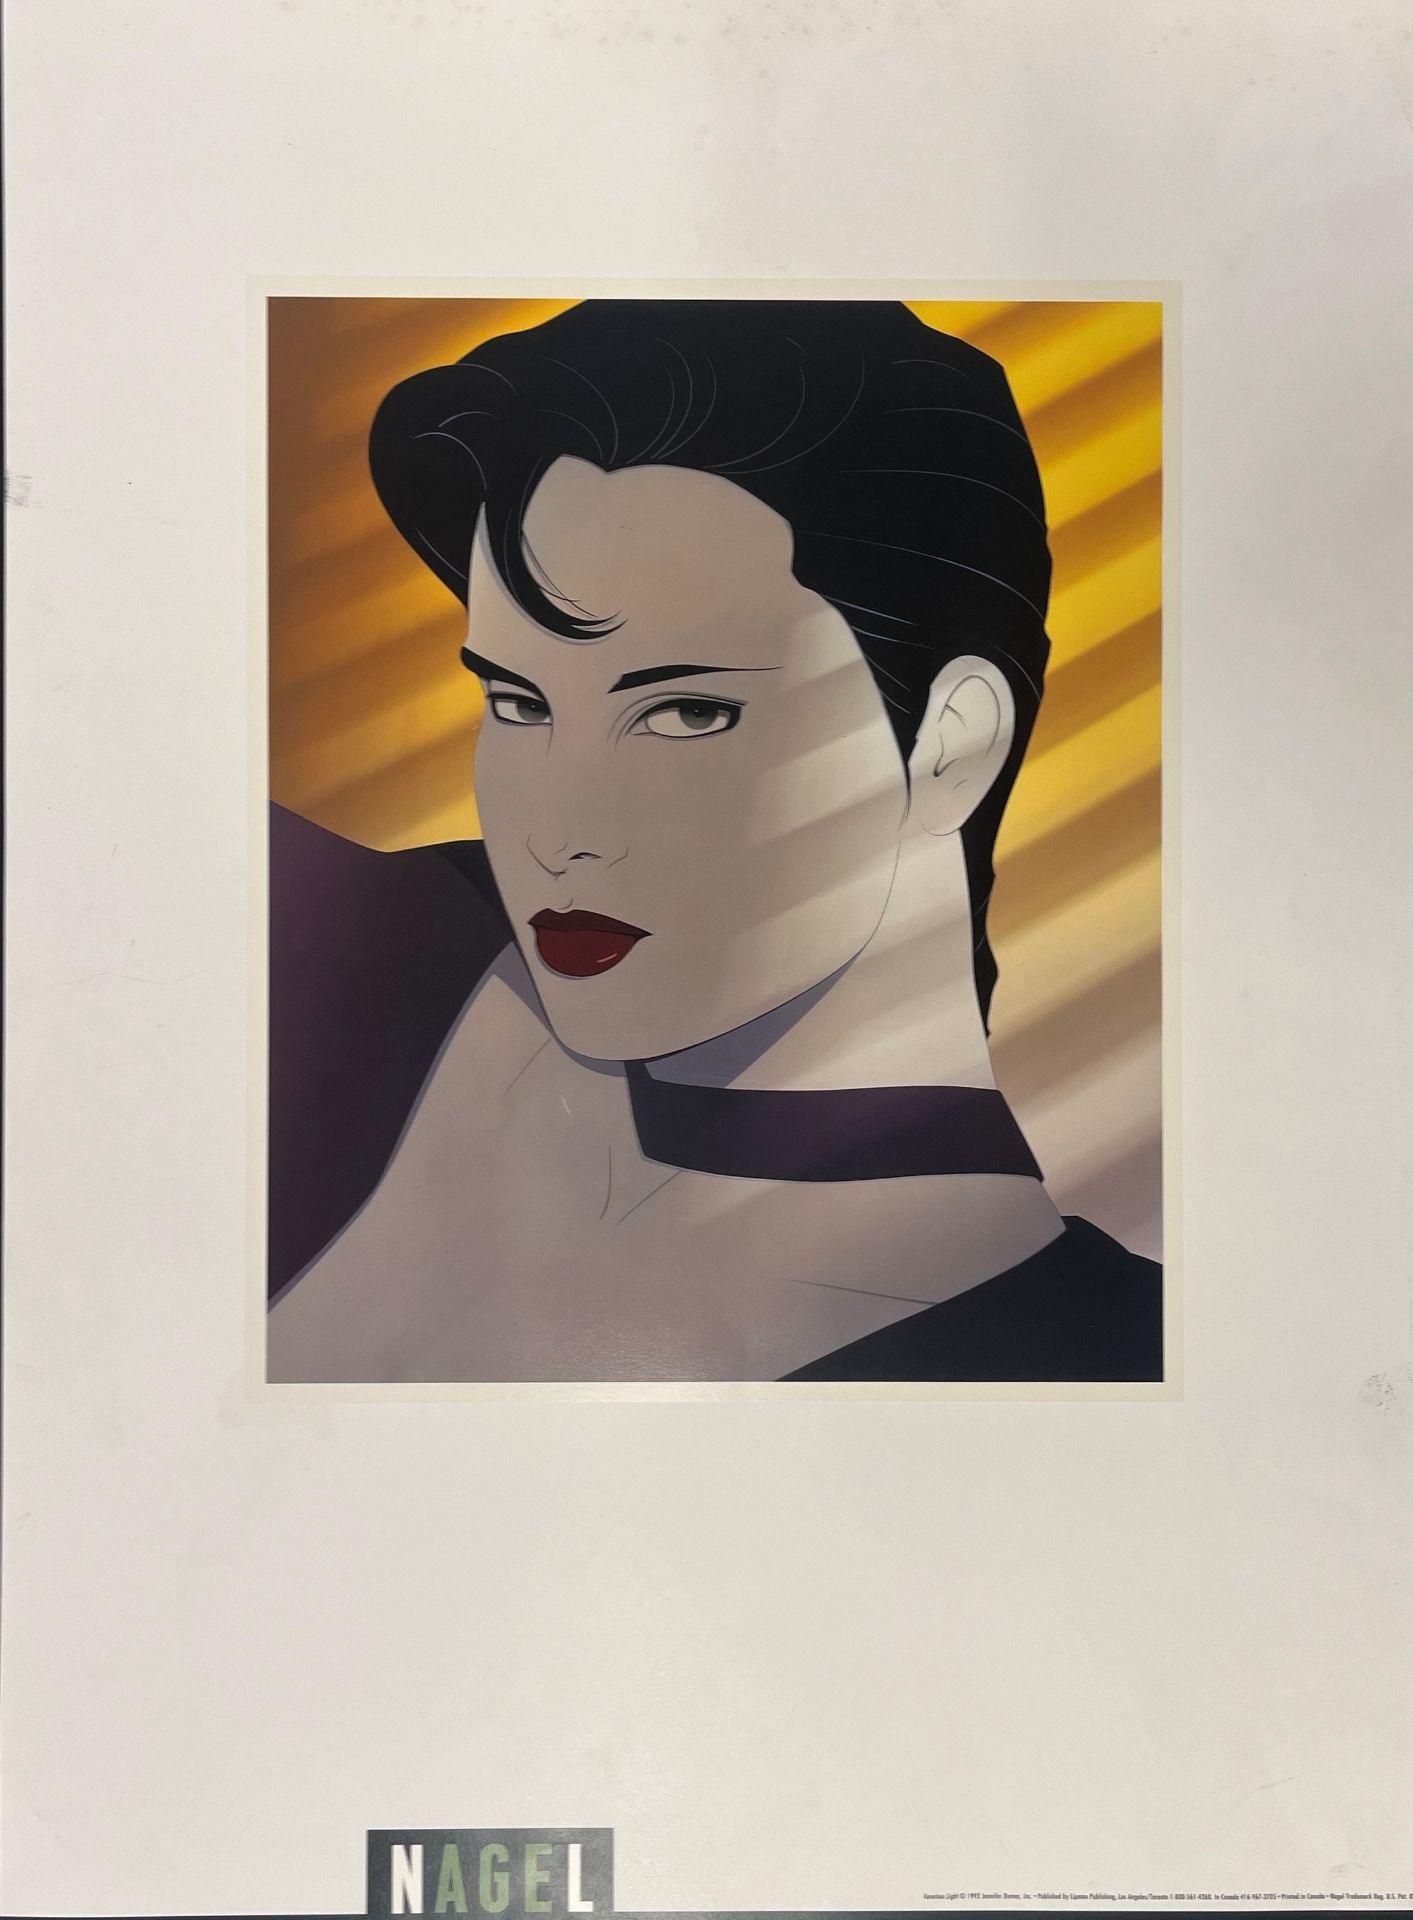 FOUR ASSORTED VINTAGE POSTERS - ANDY WARHOL/MAGRITTE/NAGEL - Image 3 of 13